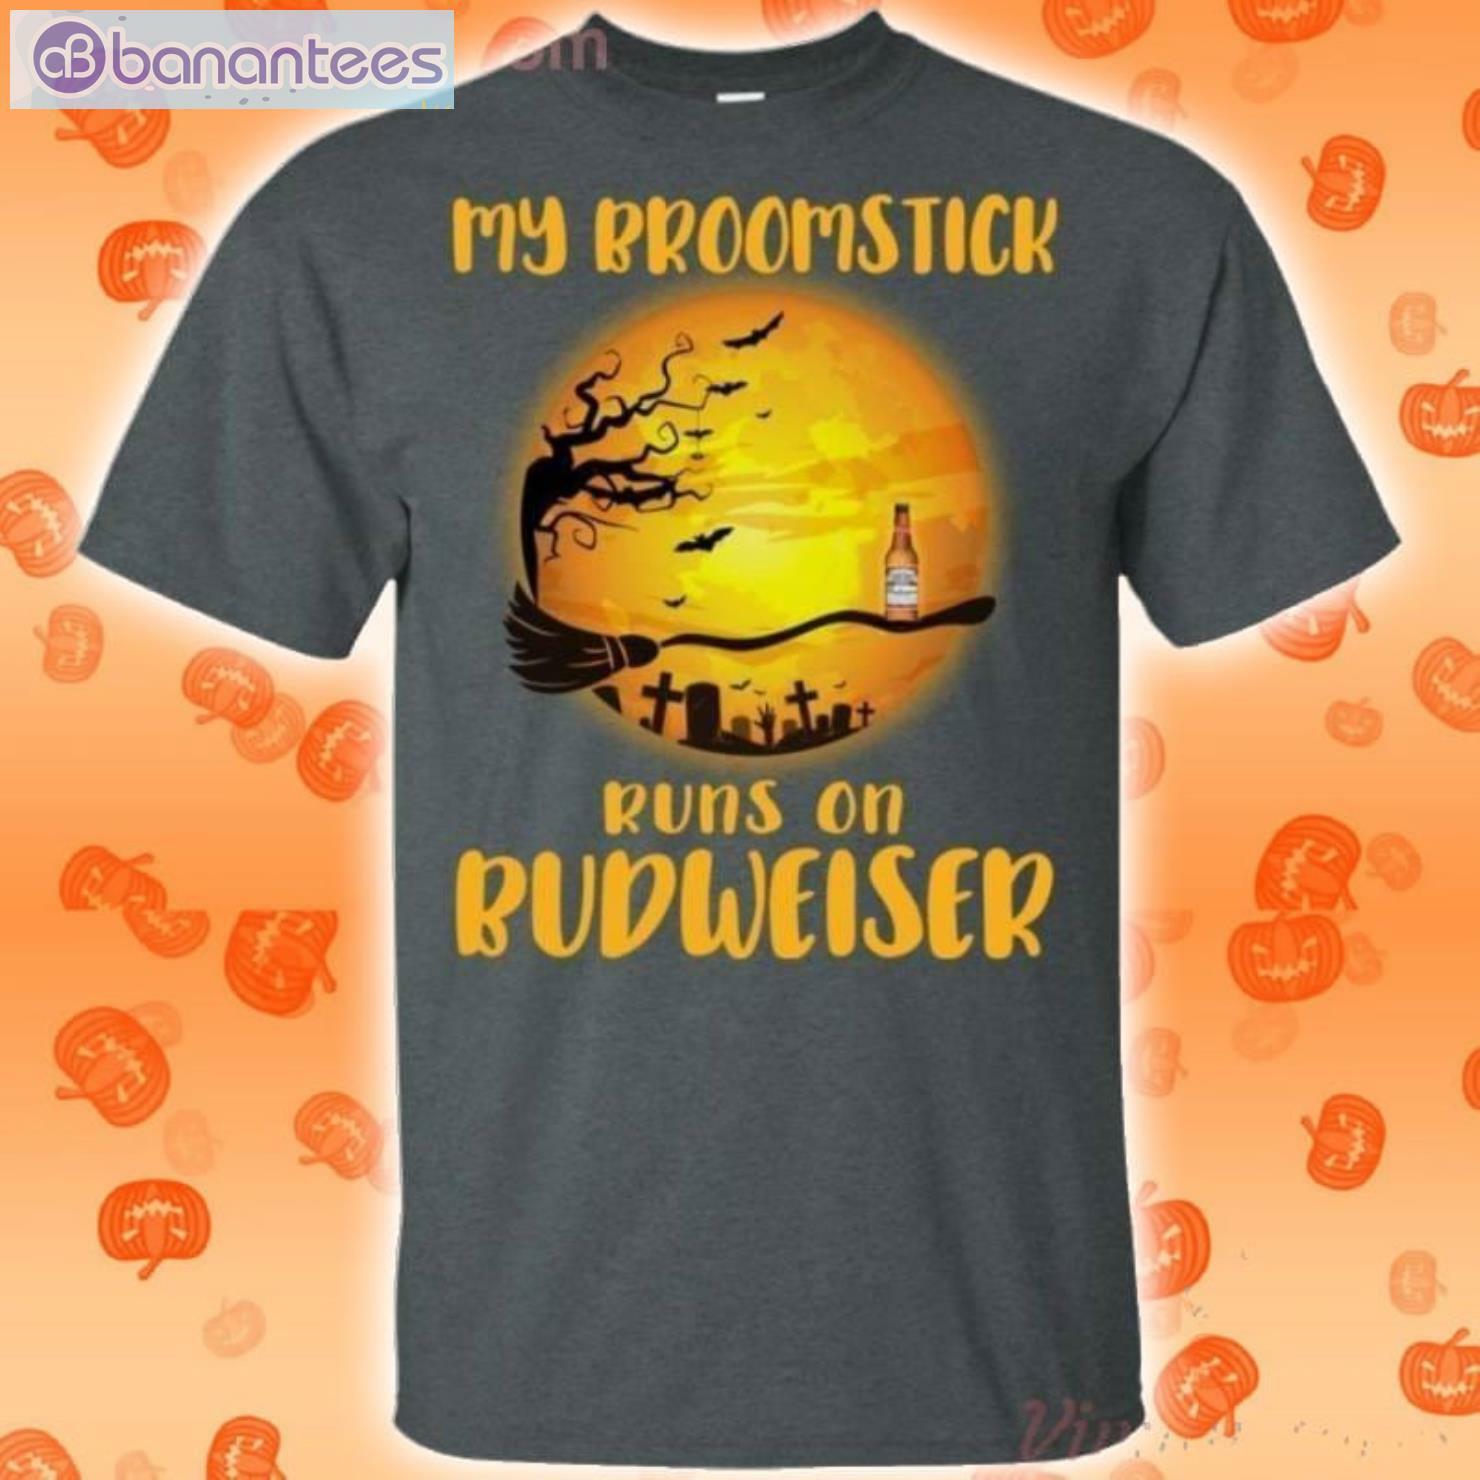 My Broomstick Runs On Budweiser Funny Beer Halloween T-Shirt Product Photo 2 Product photo 2